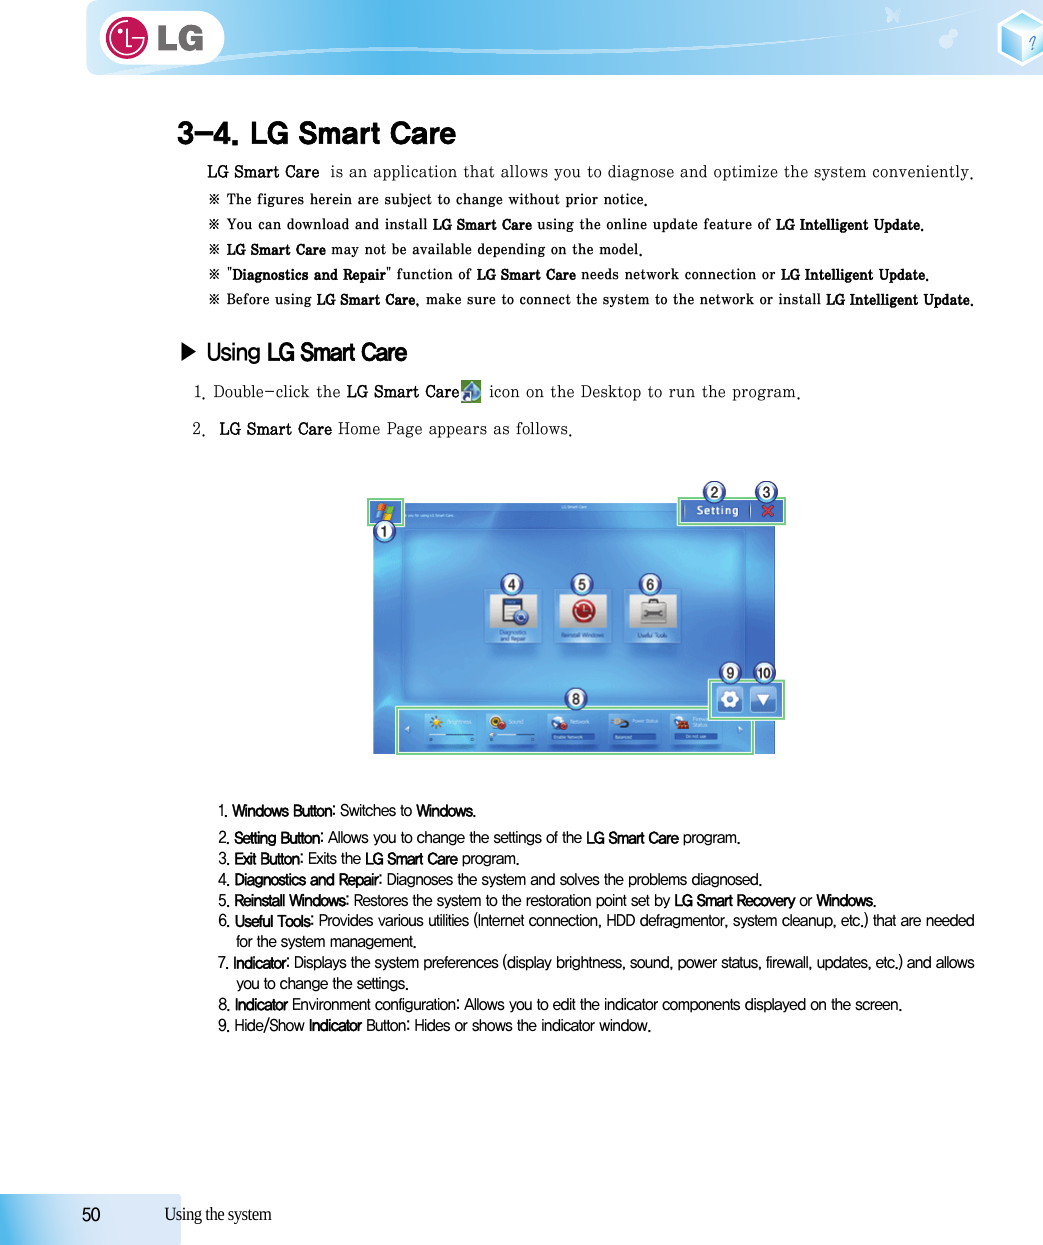 50            Using the system3-4. LG Smart CareLG Smart Care  is an application that allows you to diagnose and optimize the system conveniently.※ The figures herein are subject to change without prior notice.※ You can download and install LG Smart Care using the online update feature of LG Intelligent Update.※ LG Smart Care may not be available depending on the model.※ &quot;Diagnostics and Repair&quot; function of LG Smart Care needs network connection or LG Intelligent Update. ※ Before using LG Smart Care, make sure to connect the system to the network or install LG Intelligent Update.▶Using LG Smart Care1. Double-click the LG Smart Care icon on the Desktop to run the program.2.  LG Smart Care Home Page appears as follows.1. Windows Button: Switches to Windows.2. Setting Button: Allows you to change the settings of the LG Smart Care program.3. Exit Button: Exits the LG Smart Care program.4. Diagnostics and Repair: Diagnoses the system and solves the problems diagnosed.5. Reinstall Windows: Restores the system to the restoration point set by LG Smart Recovery or Windows.6. Useful Tools: Provides various utilities (Internet connection, HDD defragmentor, system cleanup, etc.) that are neededfor the system management.7. Indicator: Displays the system preferences (display brightness, sound, power status, firewall, updates, etc.) and allowsyou to change the settings.8. Indicator Environment configuration: Allows you to edit the indicator components displayed on the screen.9. Hide/Show Indicator Button: Hides or shows the indicator window.